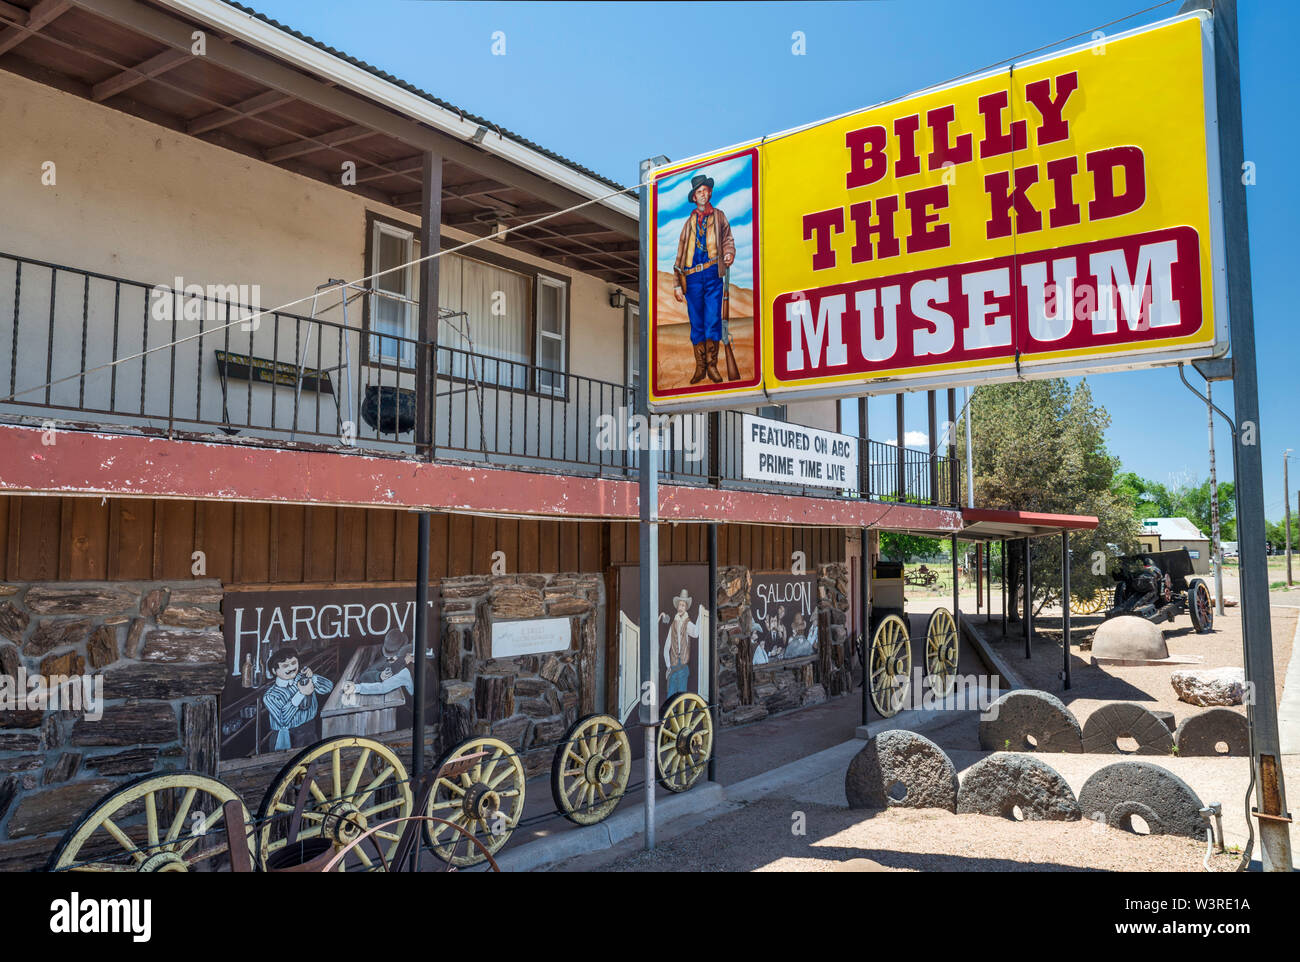 Billy the Kid Museum, Fort Sumner, New Mexico, USA Stock Photo